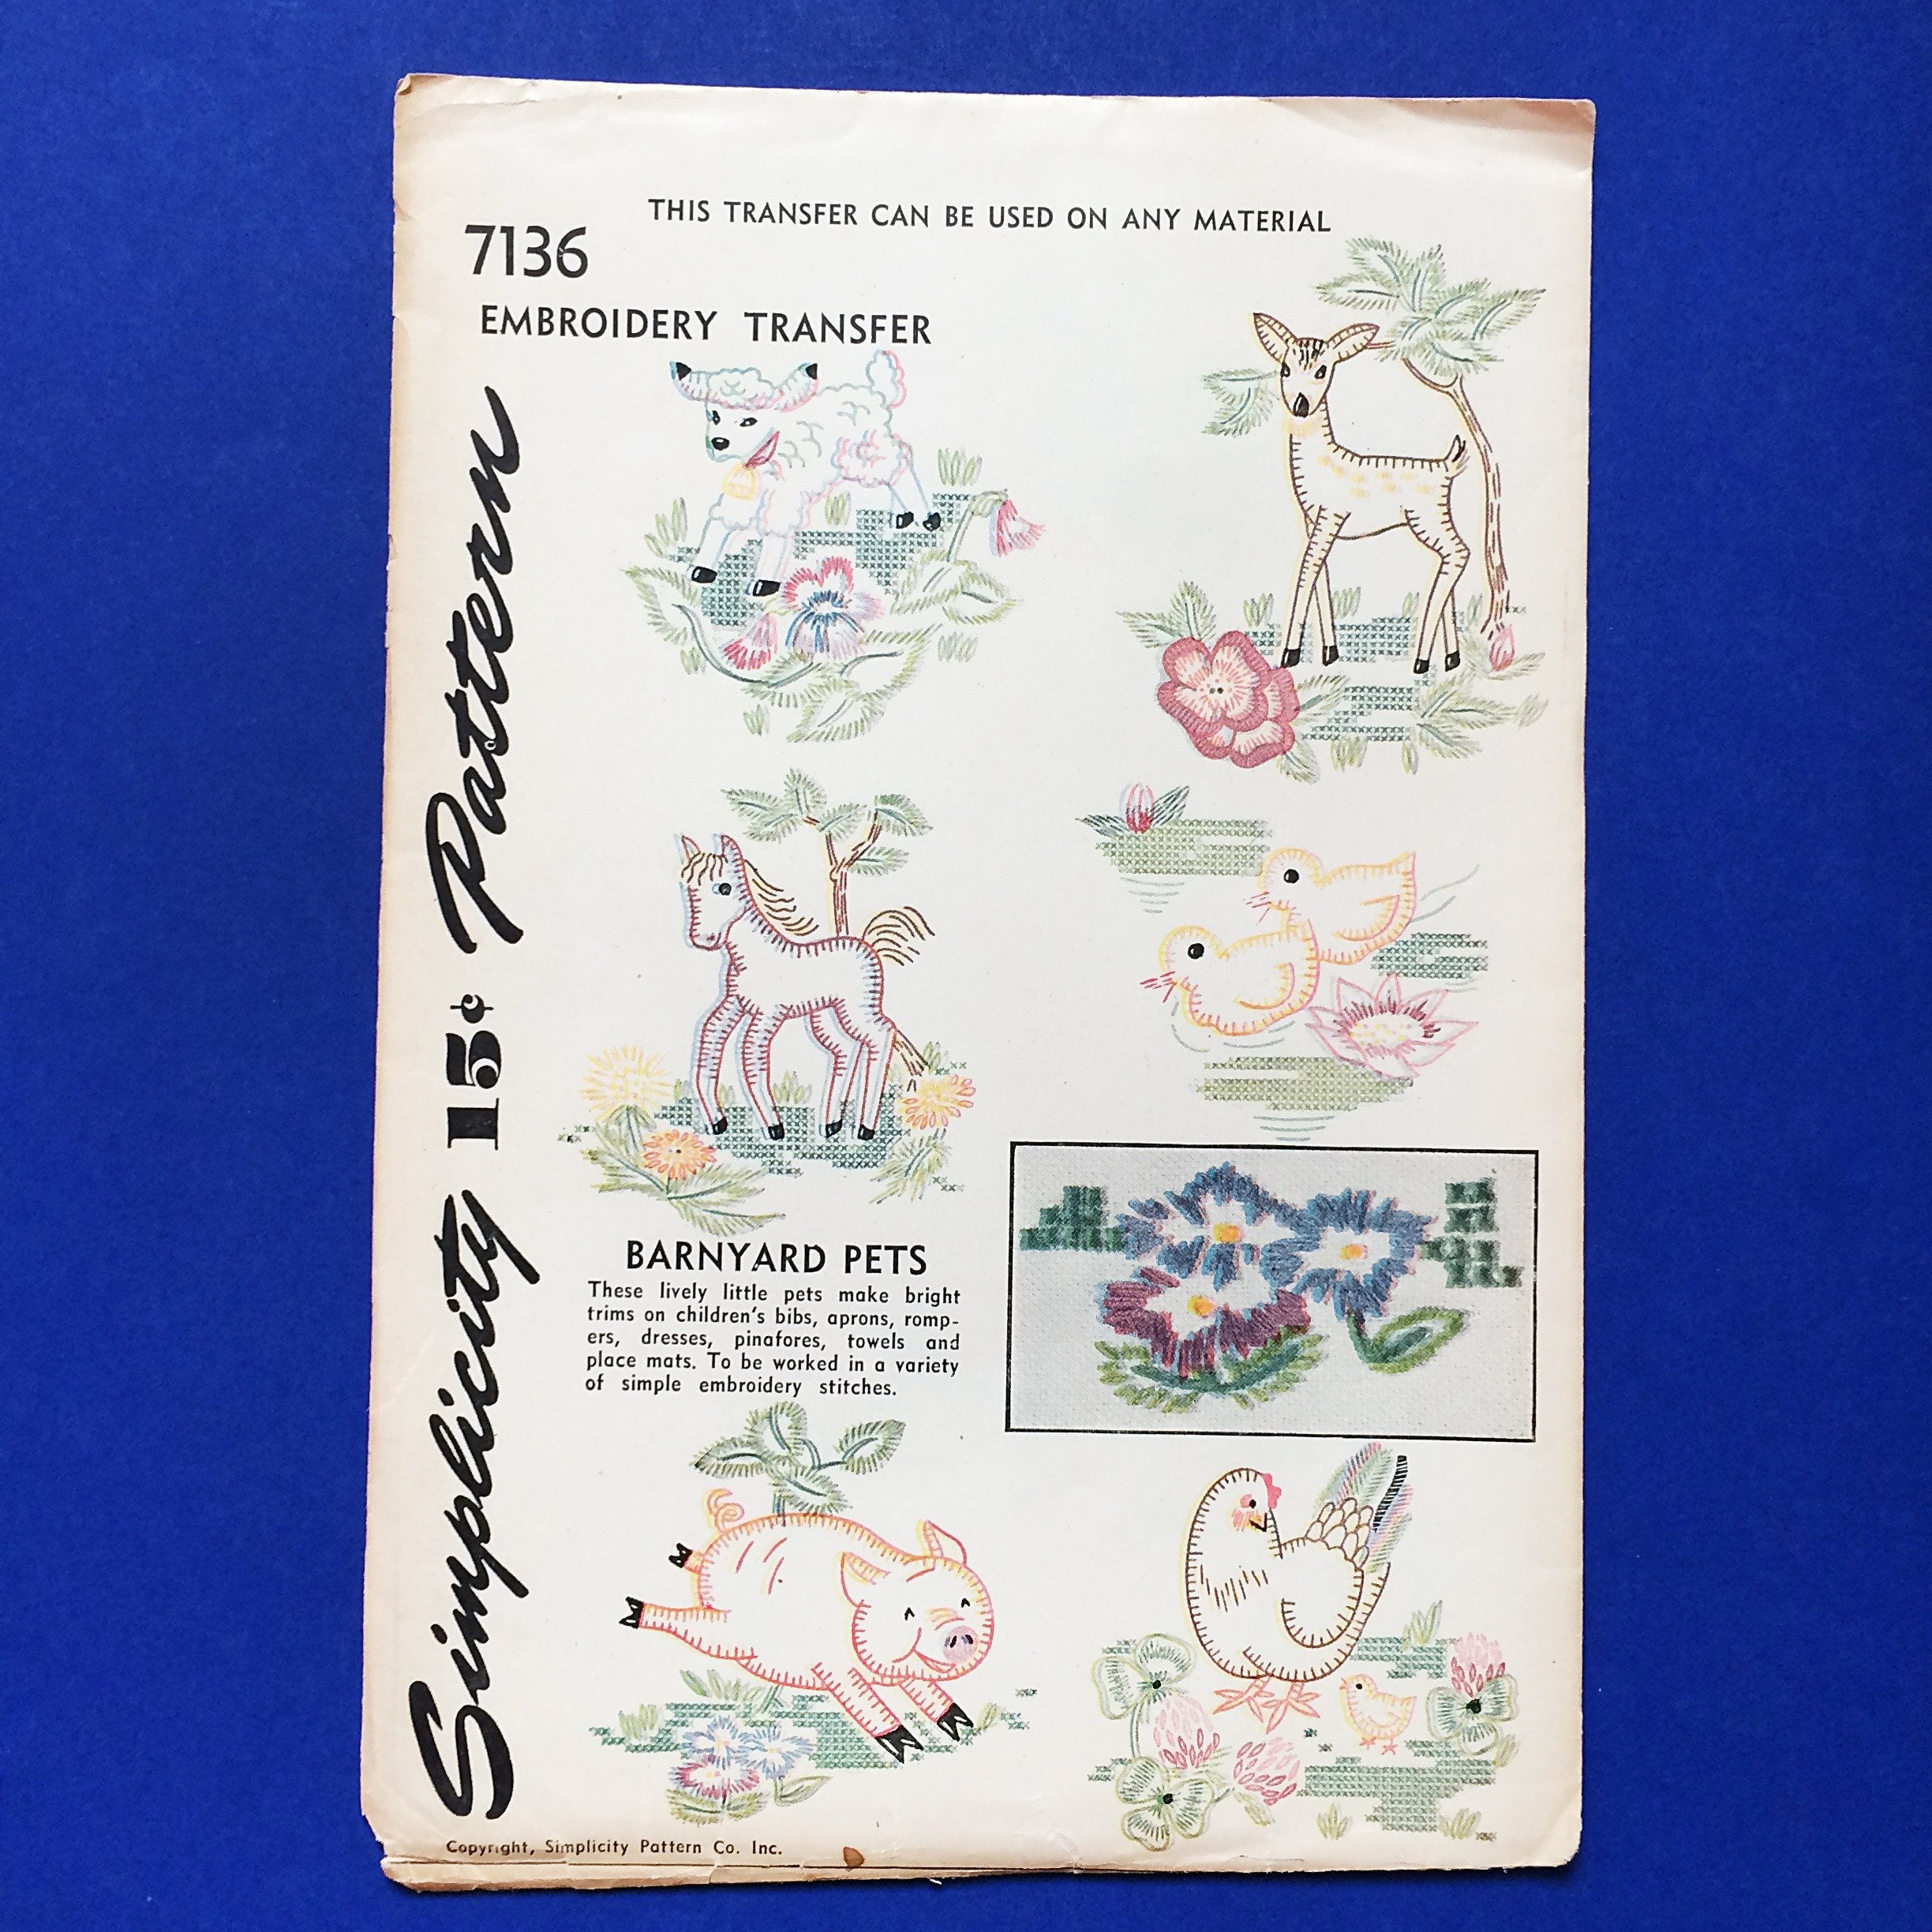 Vintage Embroidery Transfer Patterns Very Rare Original Uncut Vintage Embroidery Transfer Pattern Simplicity 7136 Barnyard Pets Animals For Children 1940s